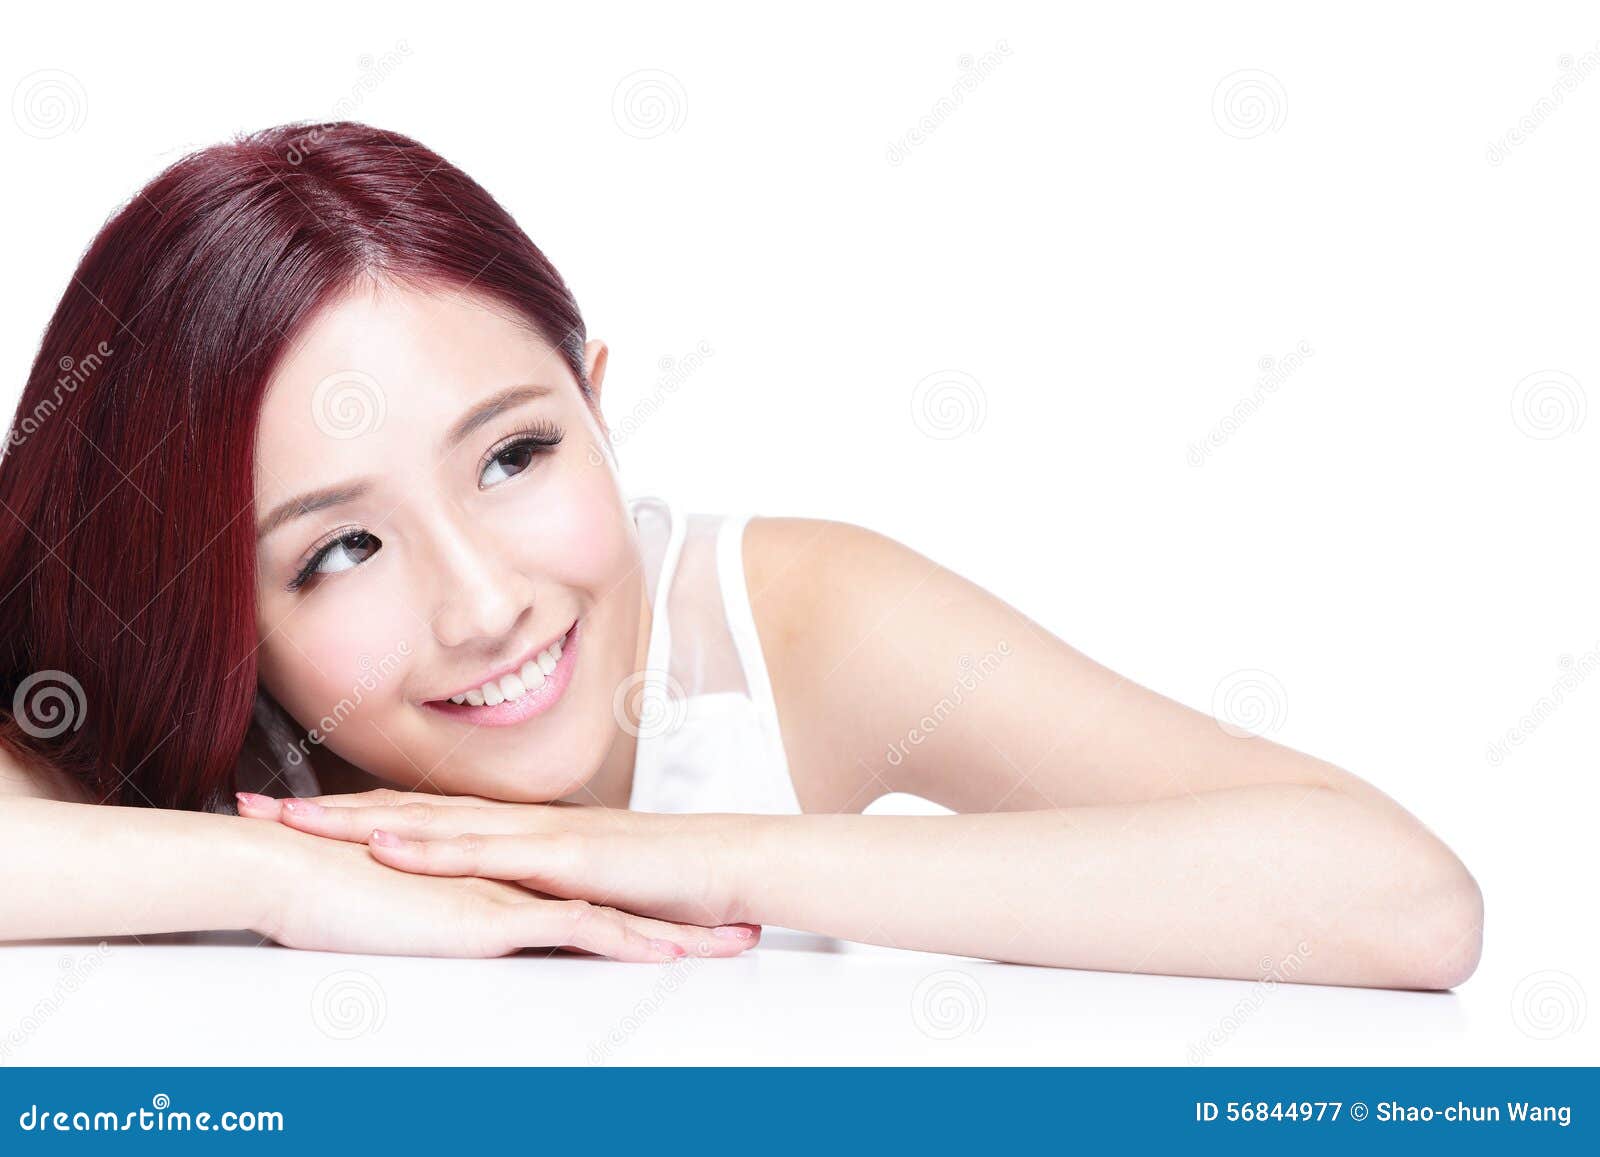 charming woman smile face